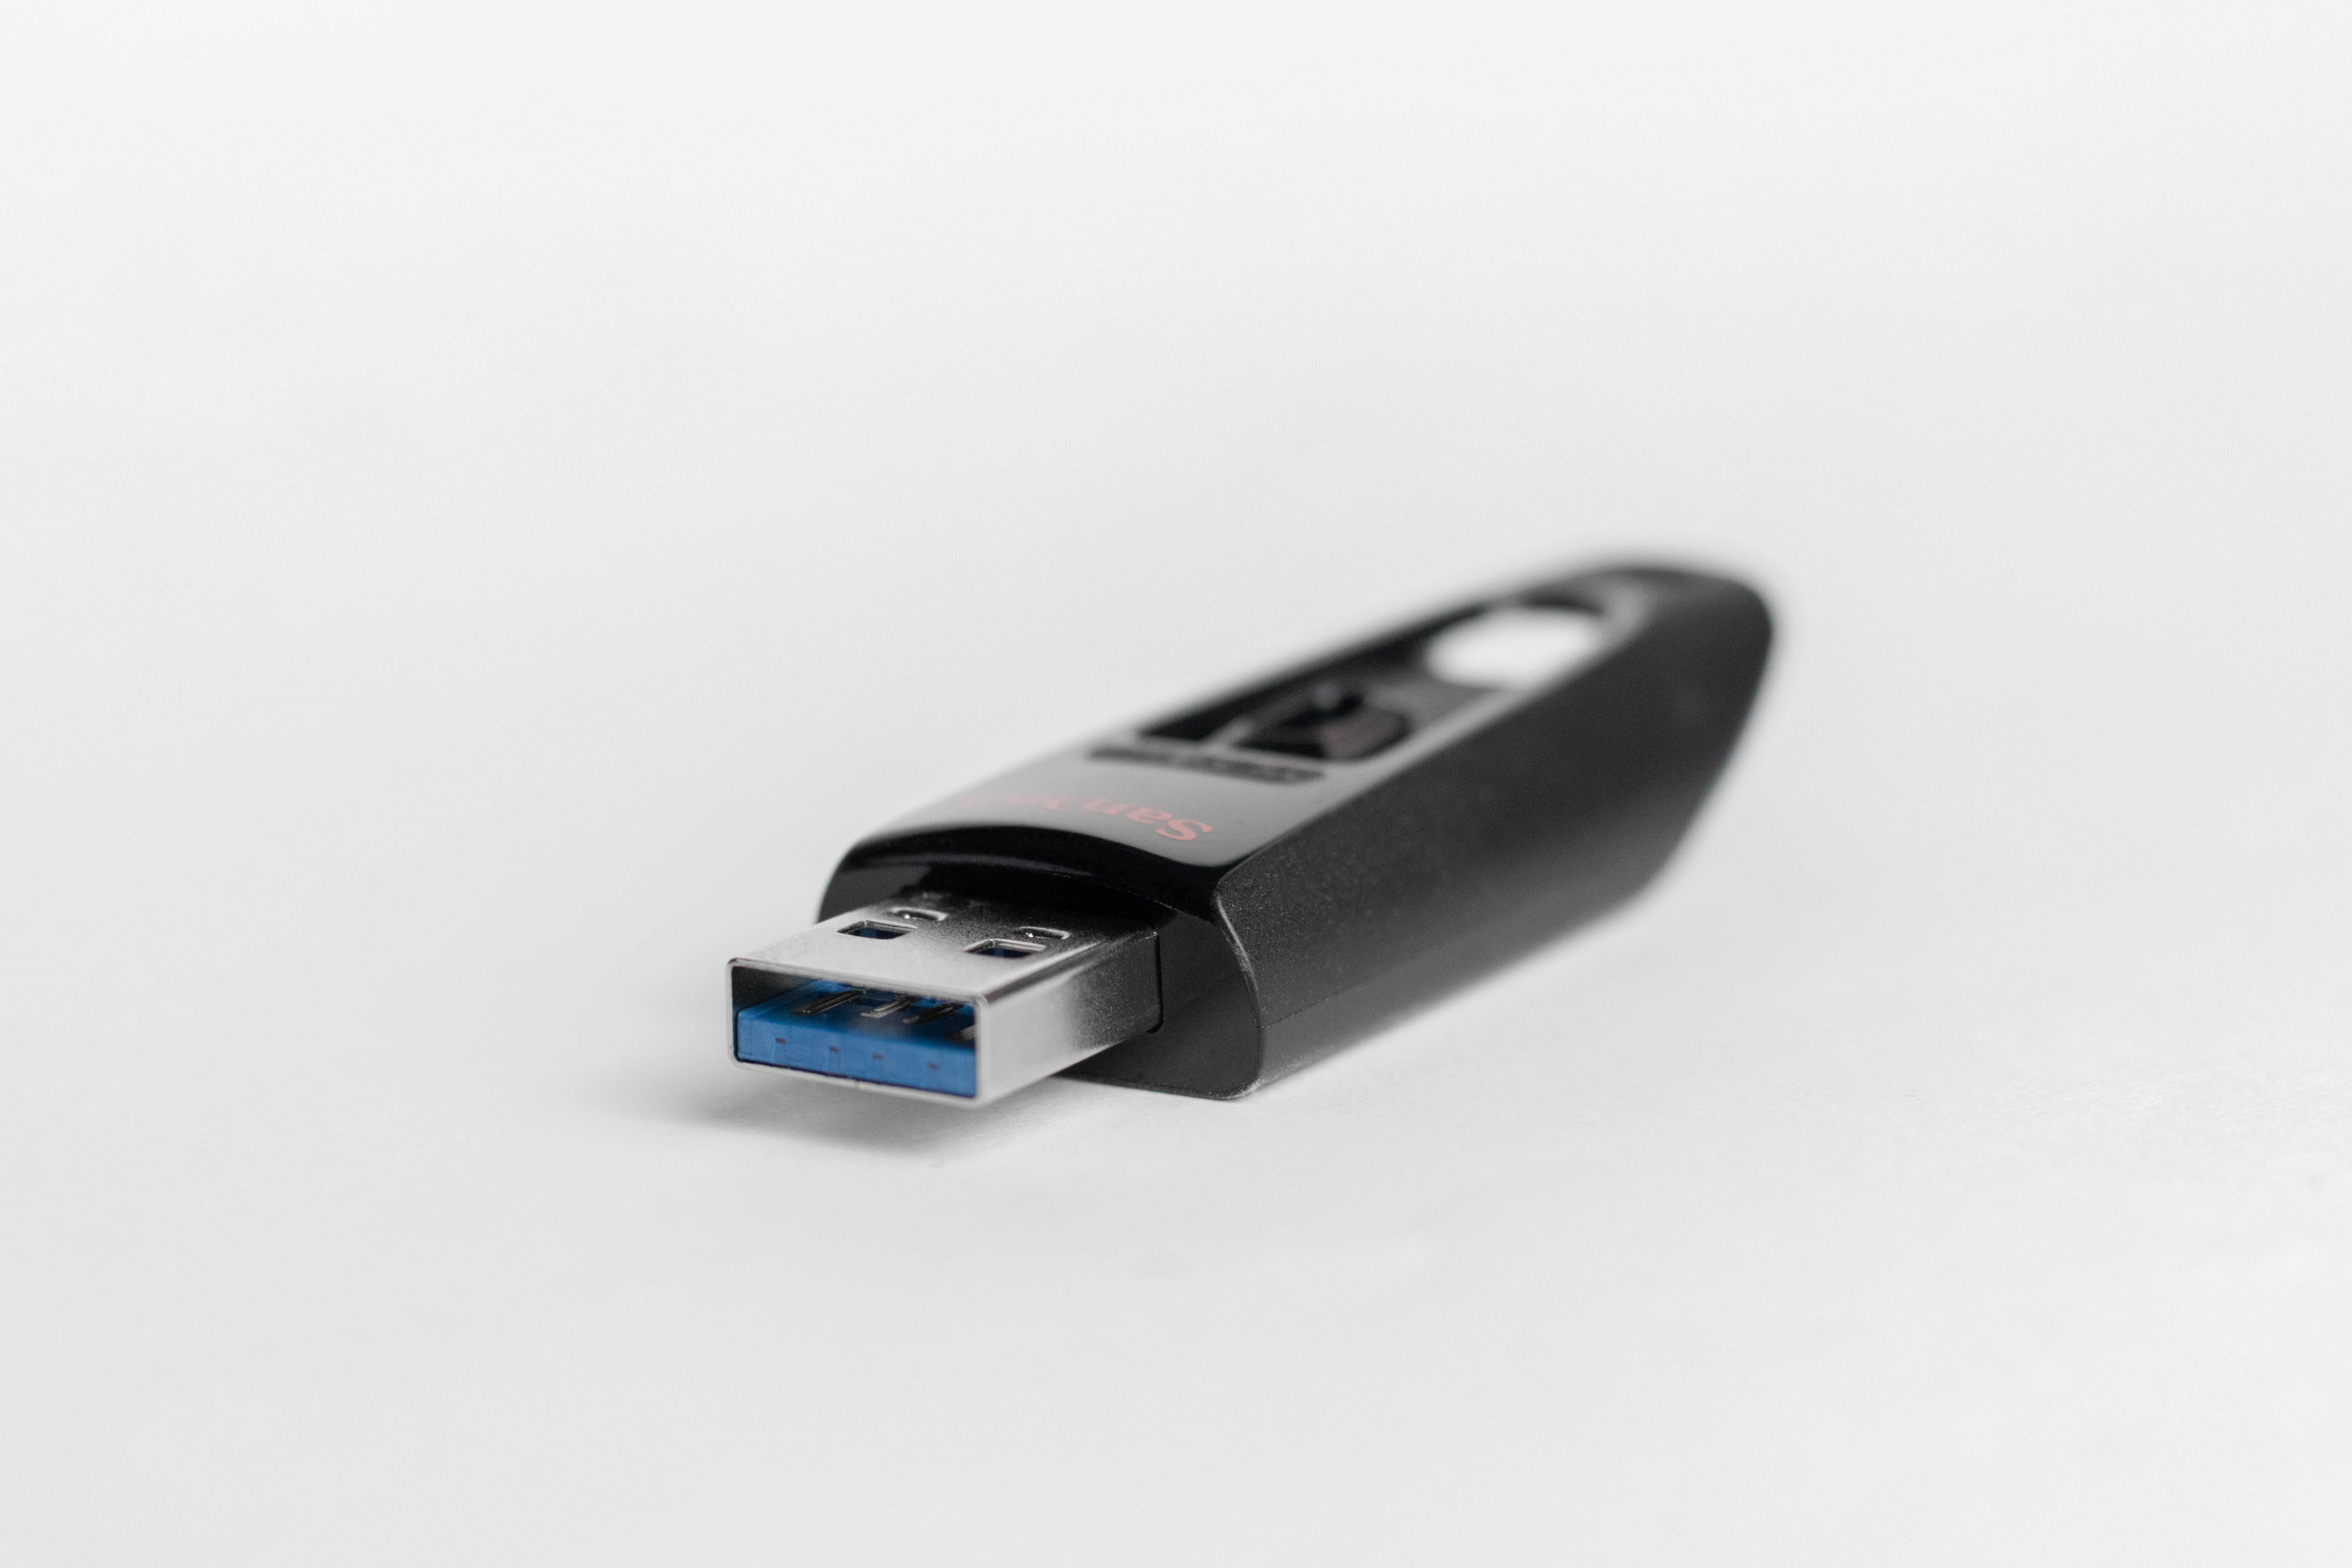 How Does a Flash Drive Work? 